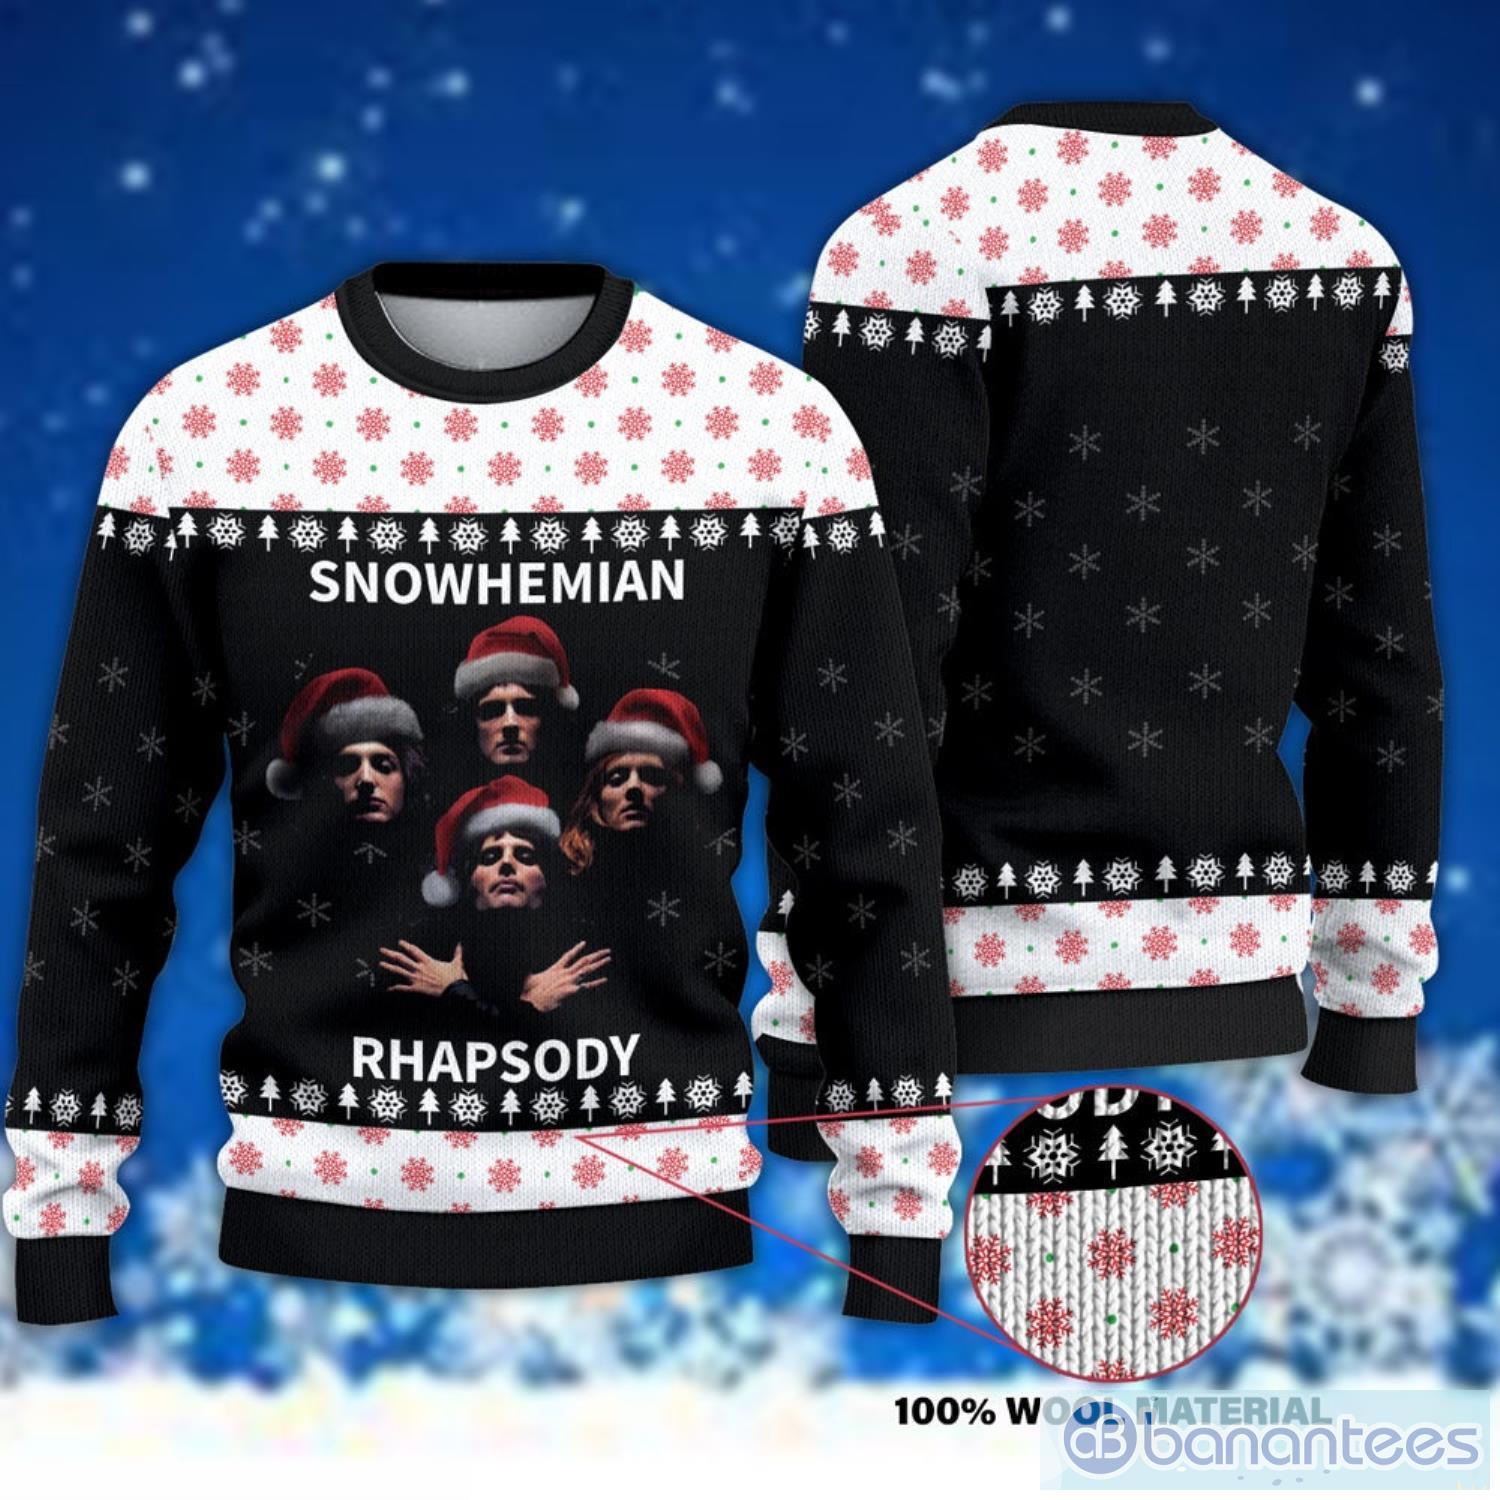 Snowhemian Rhapsody Queen Christmas Ugly Sweater Product Photo 1